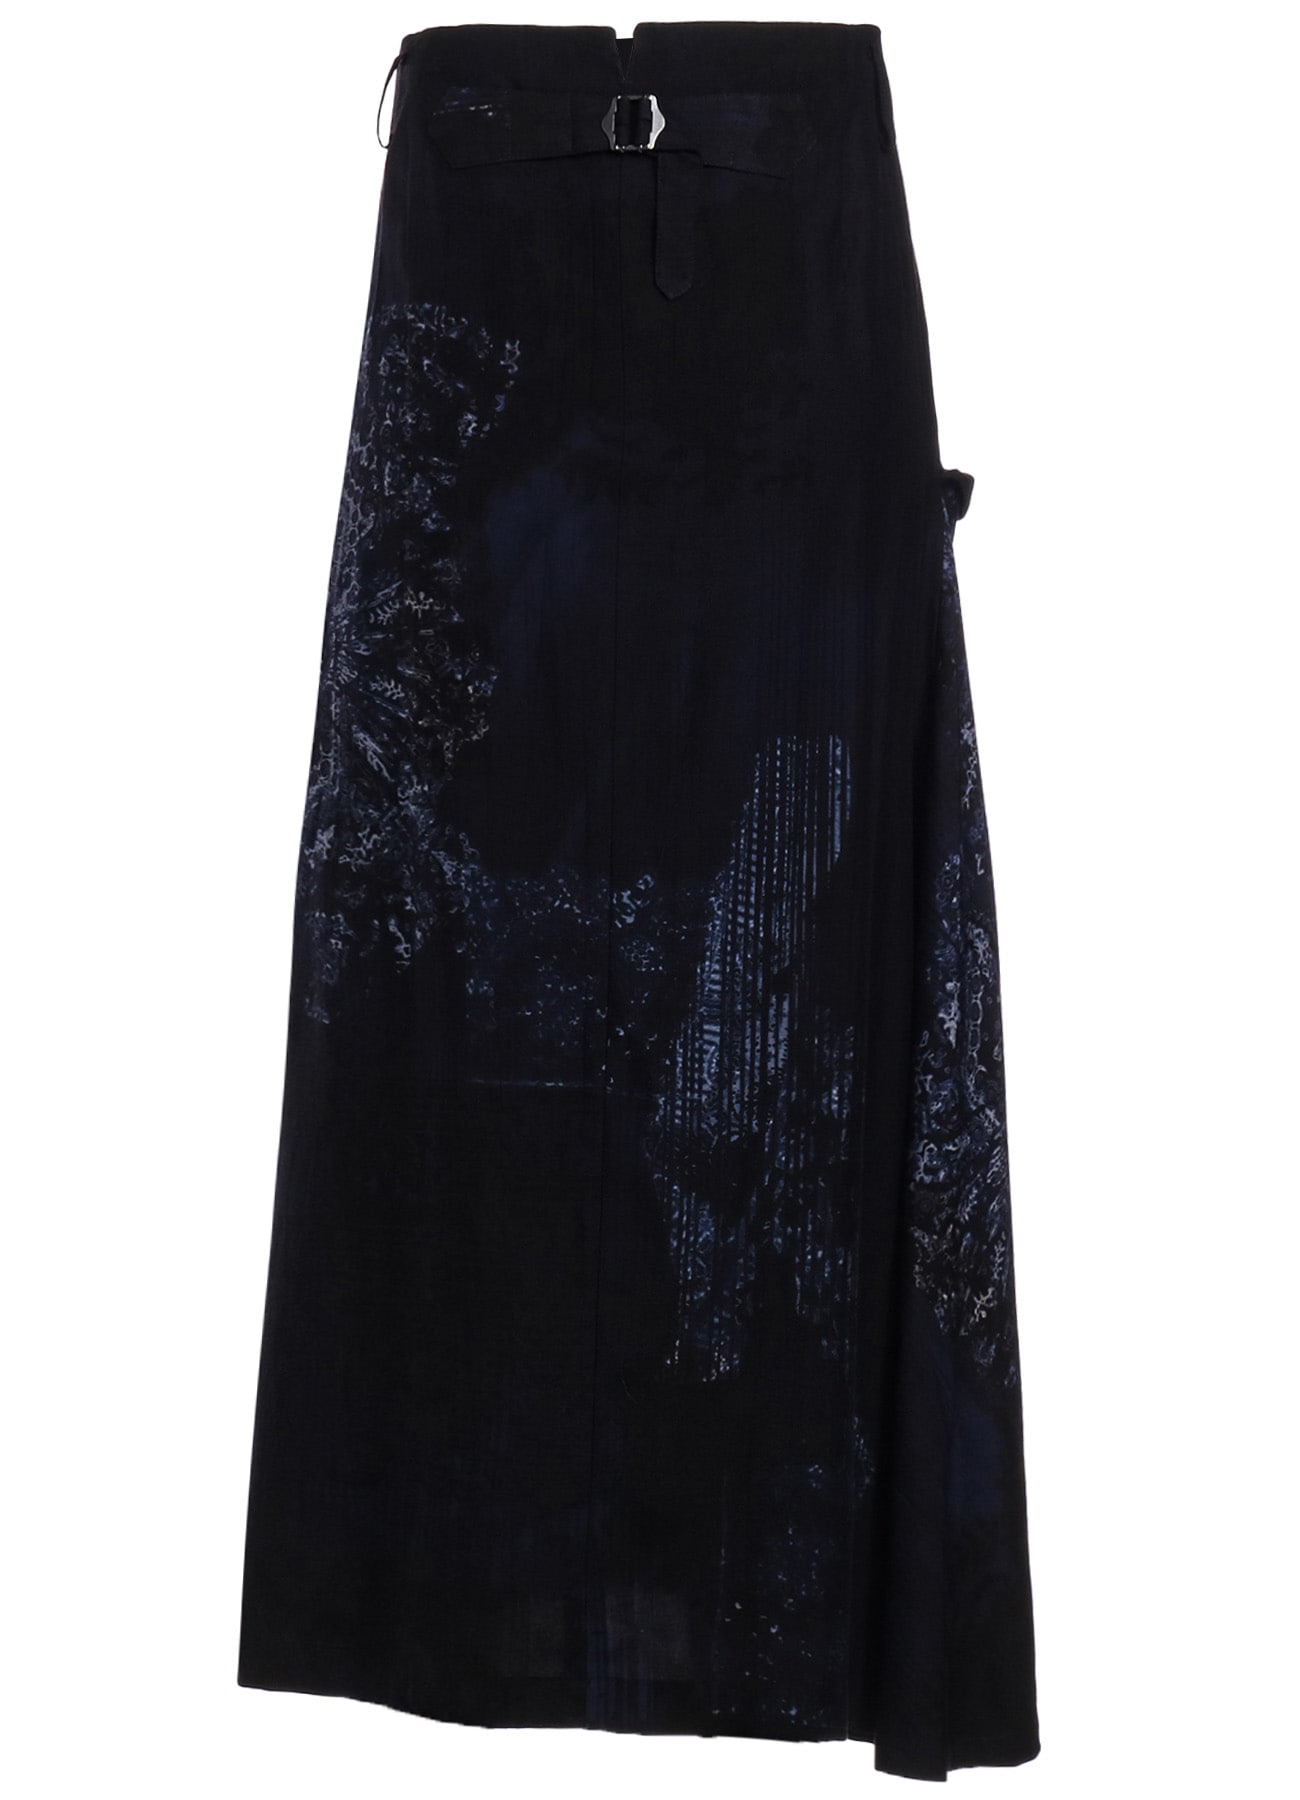 【8/2 12:00(JST) Release】CU/ TWILL LACE DESIGN PT RIGHT FLARE SKIRT